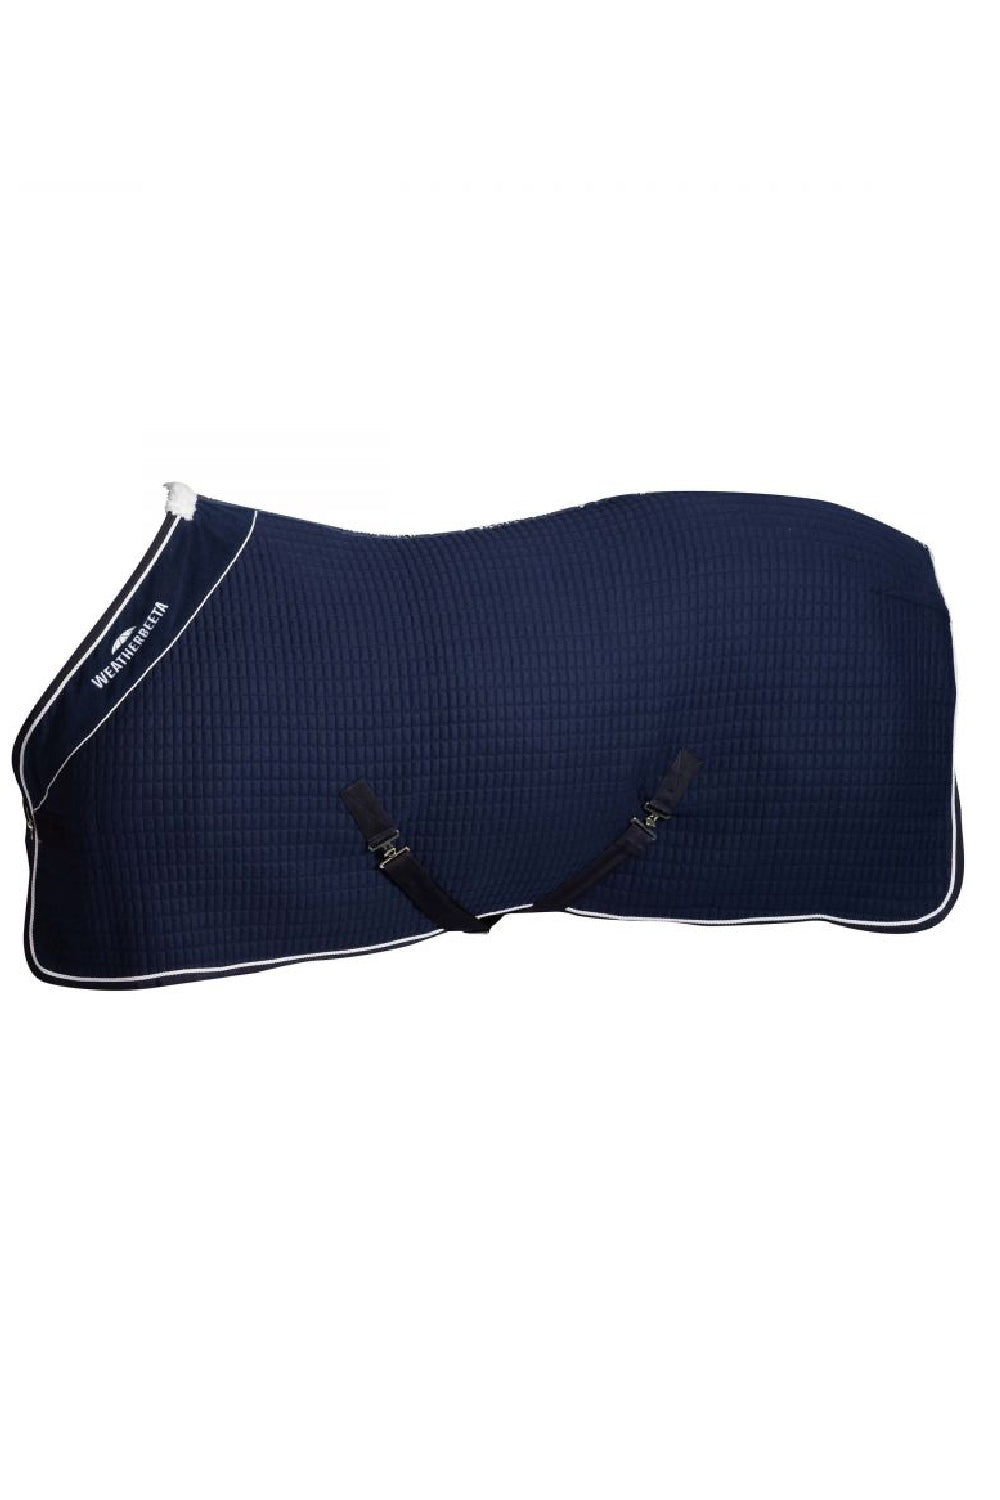 WeatherBeeta Thermocell Cooler Standard Neck in Navy/White